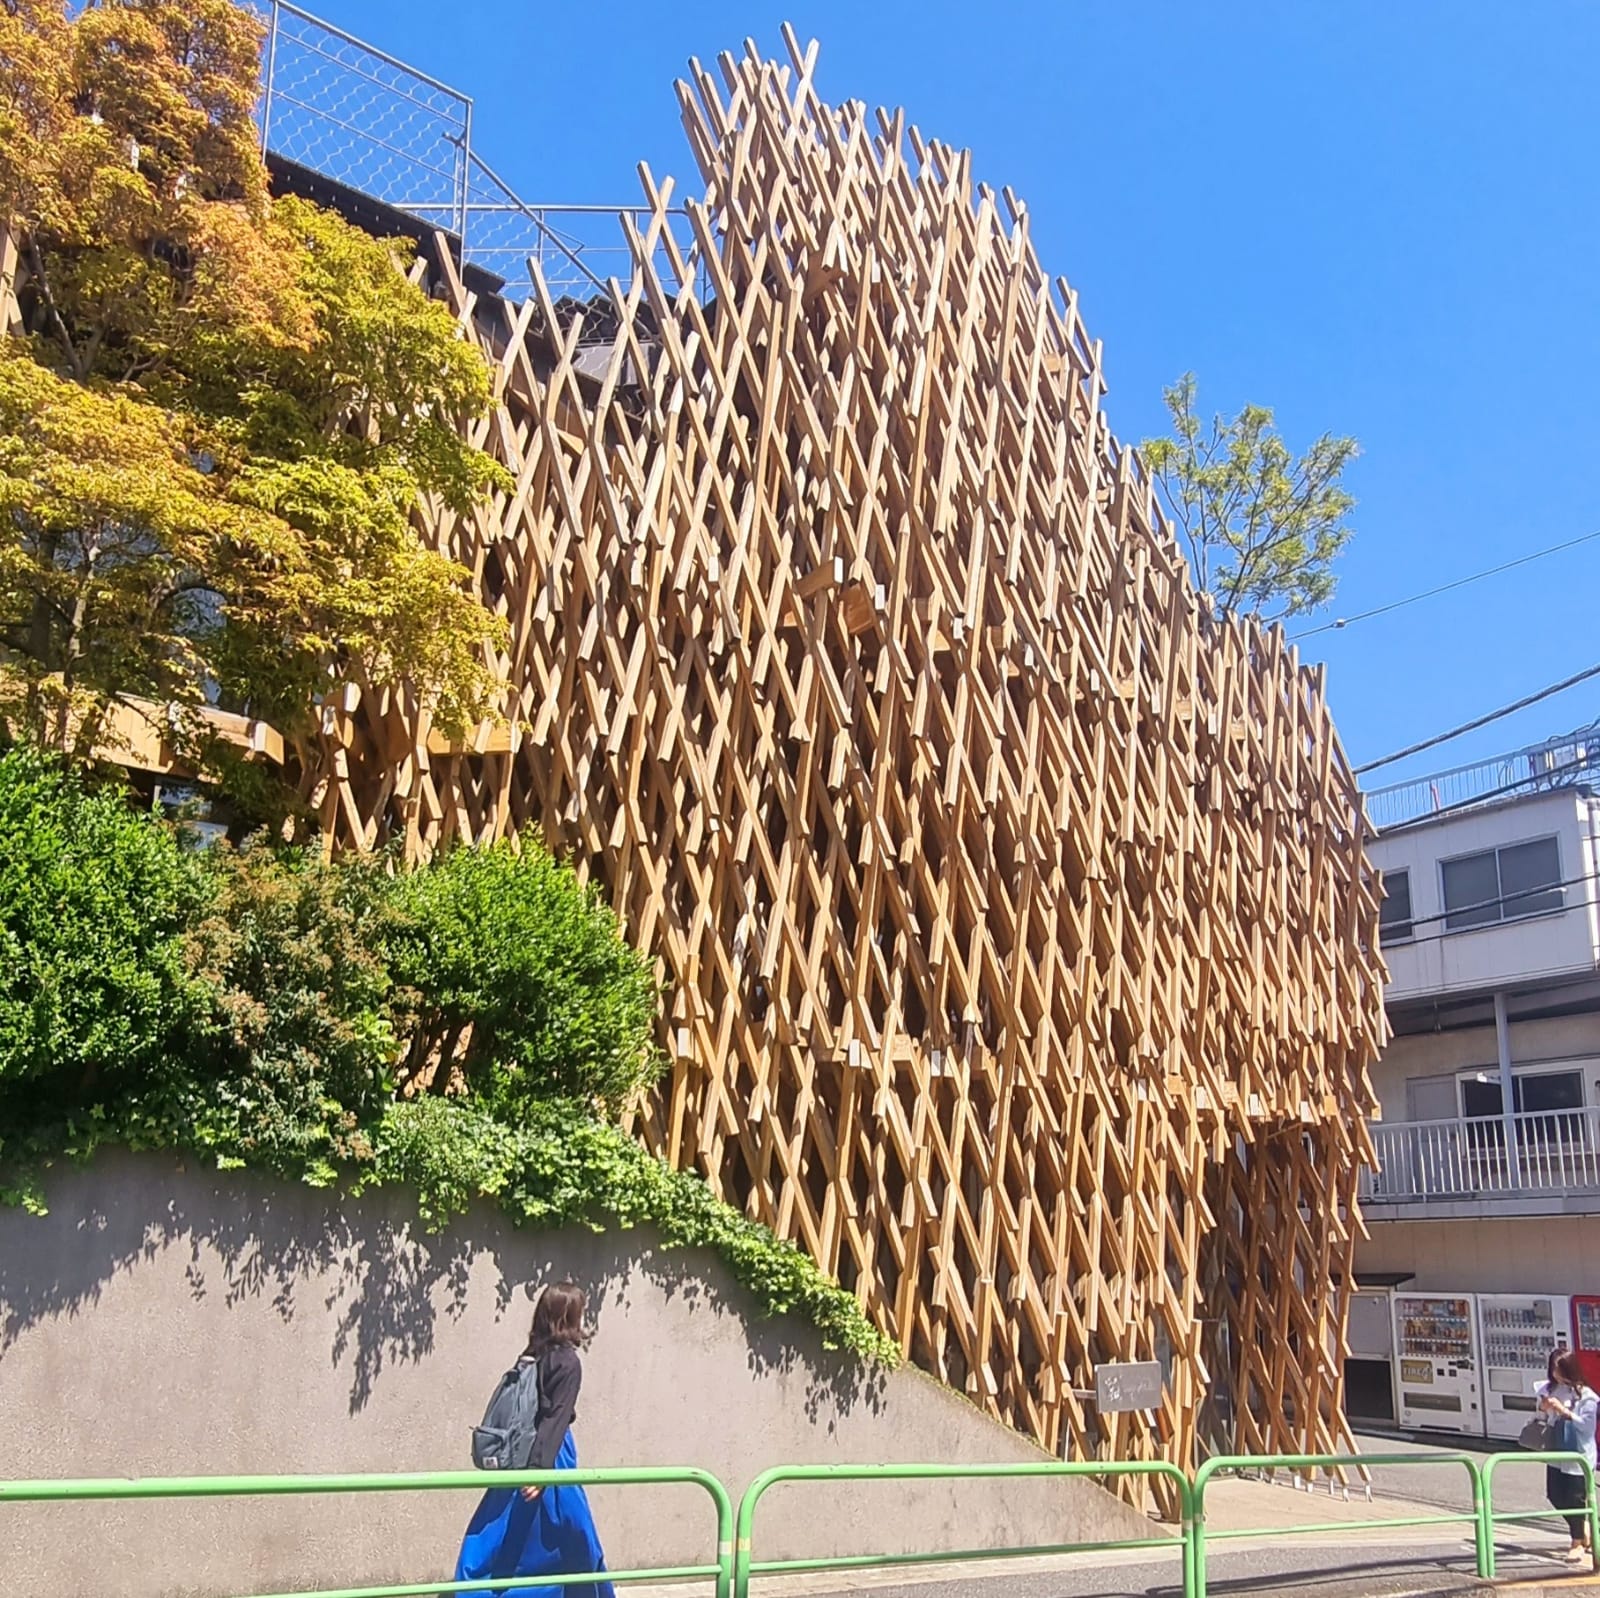 Rovina George, Japan (Tokyo, Osaka, Kochi): Crafting Architecture: Tracing encounters between tradition and modernity in Japanese Timber Construction